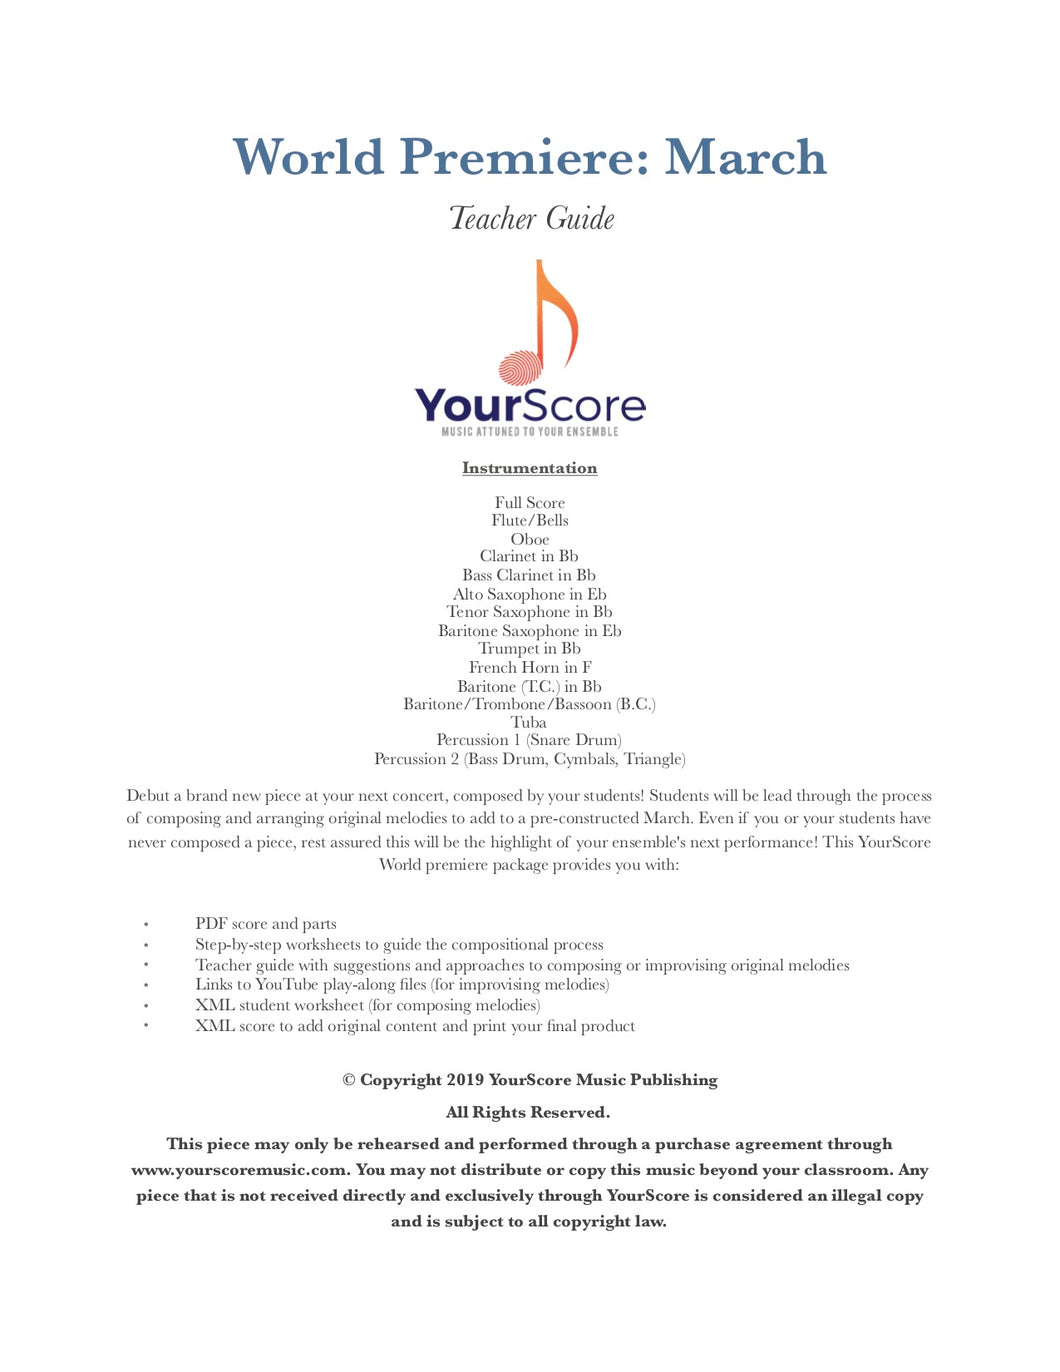 YourScore World Premiere: March Style (Band)